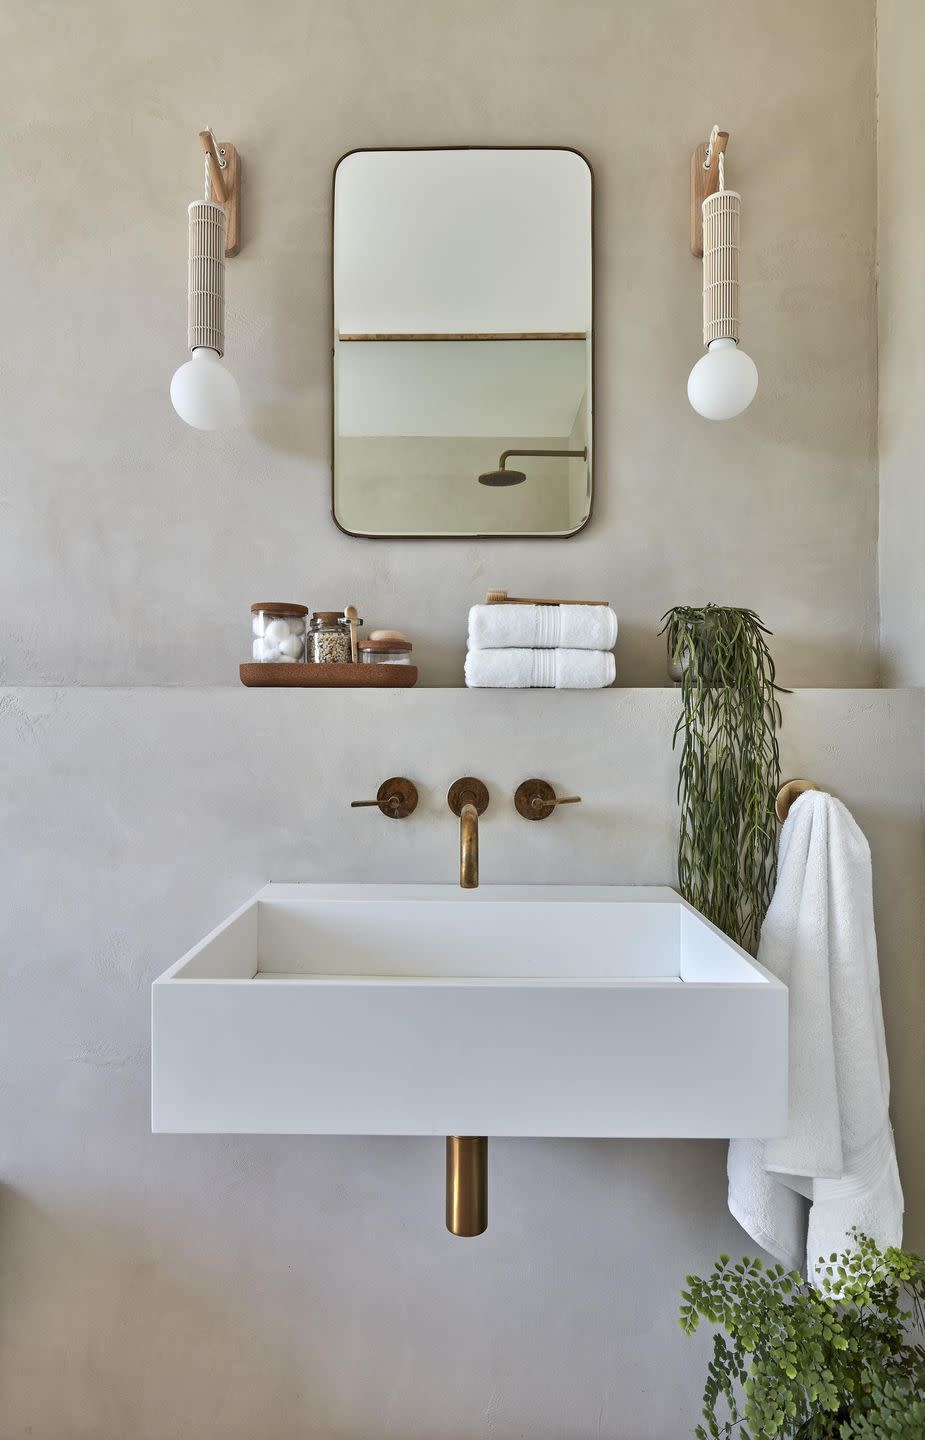 <p>'If you want your bathroom sanctuary to have a little luxury, invest in soft fluffy <a href="https://www.housebeautiful.com/uk/lifestyle/cleaning/a34685838/how-to-keep-towels-soft/" rel="nofollow noopener" target="_blank" data-ylk="slk:towels" class="link ">towels</a> and ultra-soft bath robes,' says Richard Ticehurst, Brand Expert at <a href="https://www.crosswater.co.uk" rel="nofollow noopener" target="_blank" data-ylk="slk:Crosswater" class="link ">Crosswater</a>. 'These accessories will deliver ultimate comfort, giving you that hotel feeling in the comfort of your own home.'<br></p><p>Pictured: <a href="https://www.christy.co.uk/supreme-hygro-white" rel="nofollow noopener" target="_blank" data-ylk="slk:Supreme Hygro® White Towels at Christy" class="link ">Supreme Hygro® White Towels at Christy </a></p>